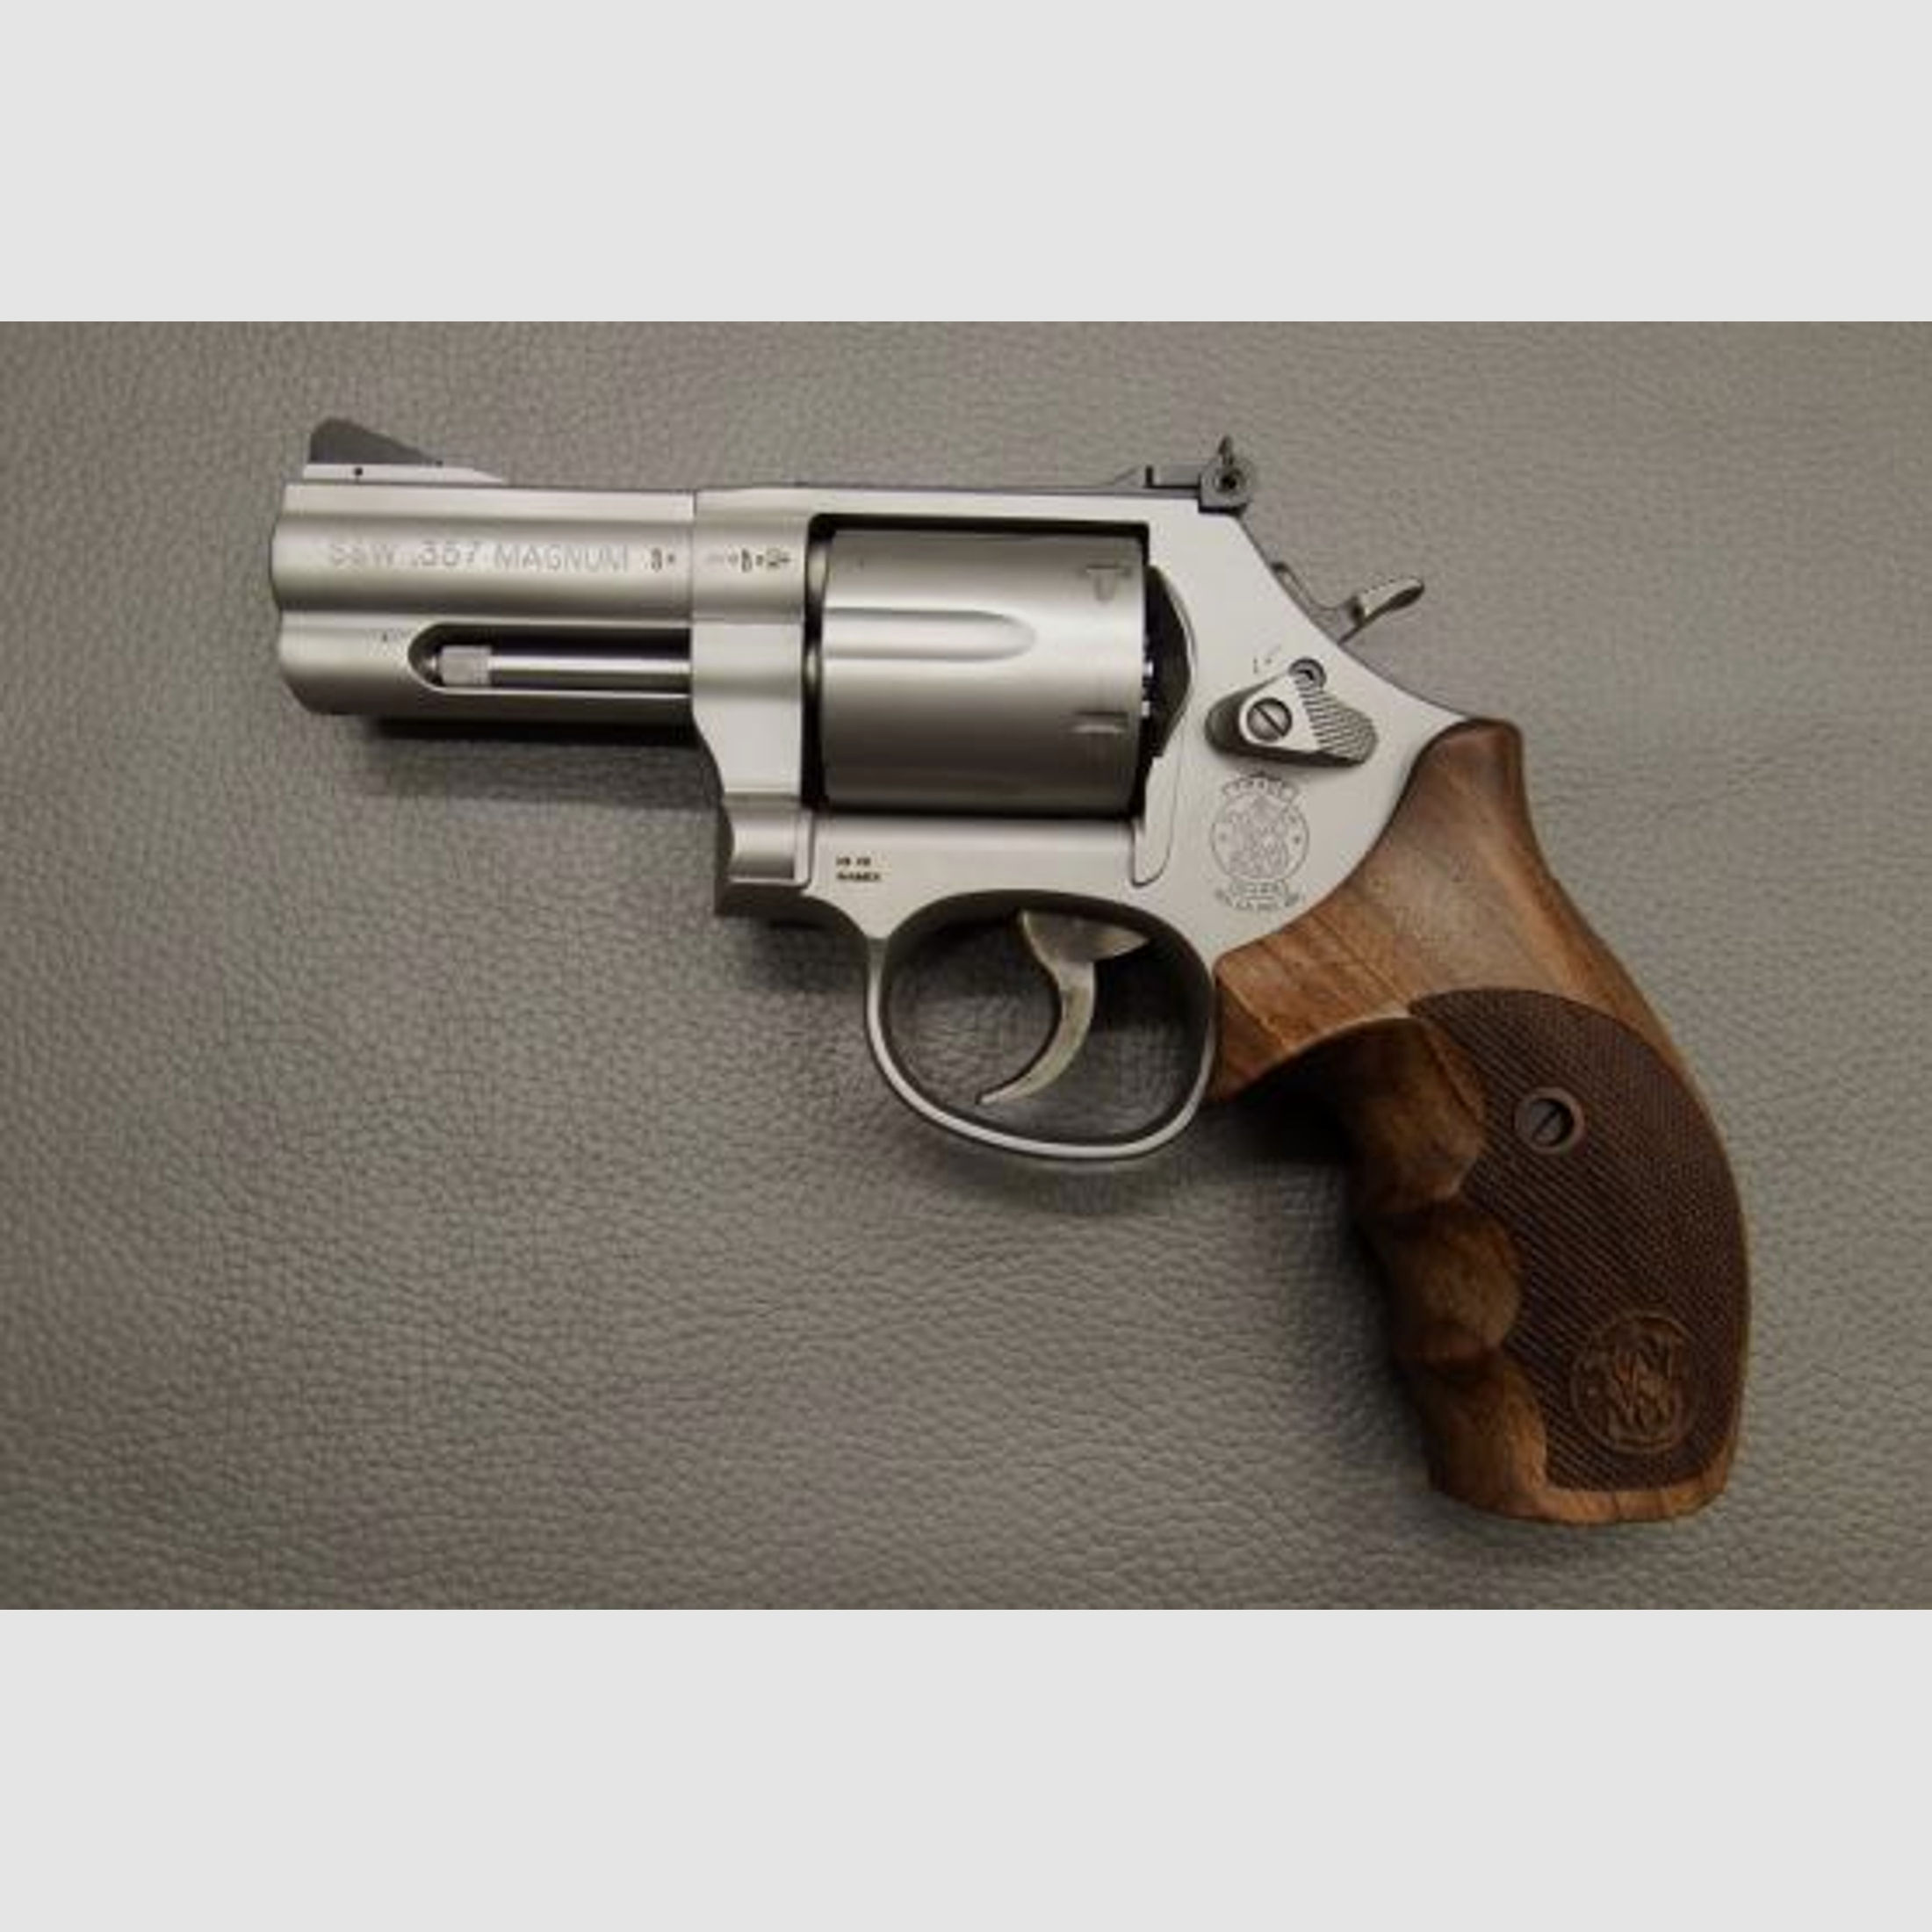 Smith & Wesson 686 Security Special 3" Kaliber .357 Magnum Revolver 
                Smith & Wesson Modell 686 Security Special Revolver